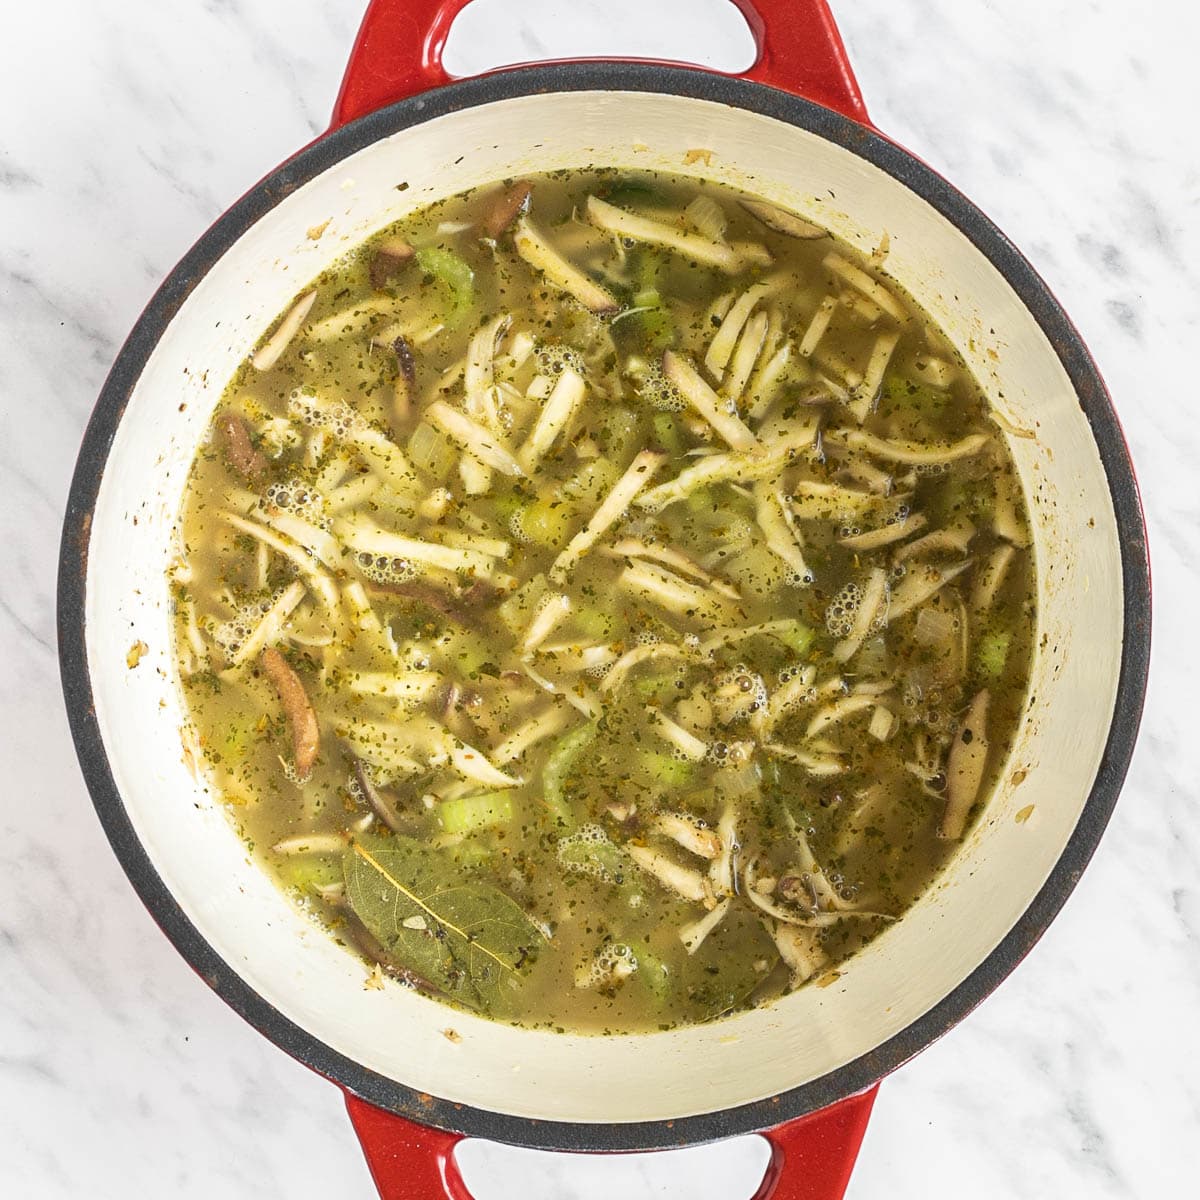 Red Dutch oven with shredded mushrooms, celery slices, chopped onion in a thin light green white soup.